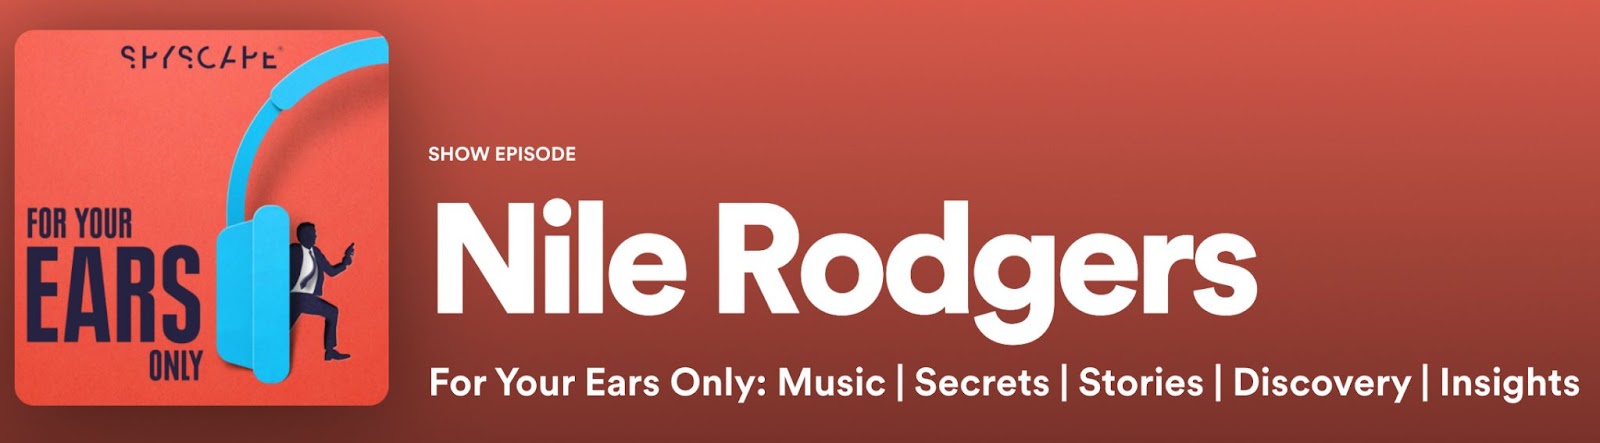 Nile Rodgers, For Your Ears Only podcast